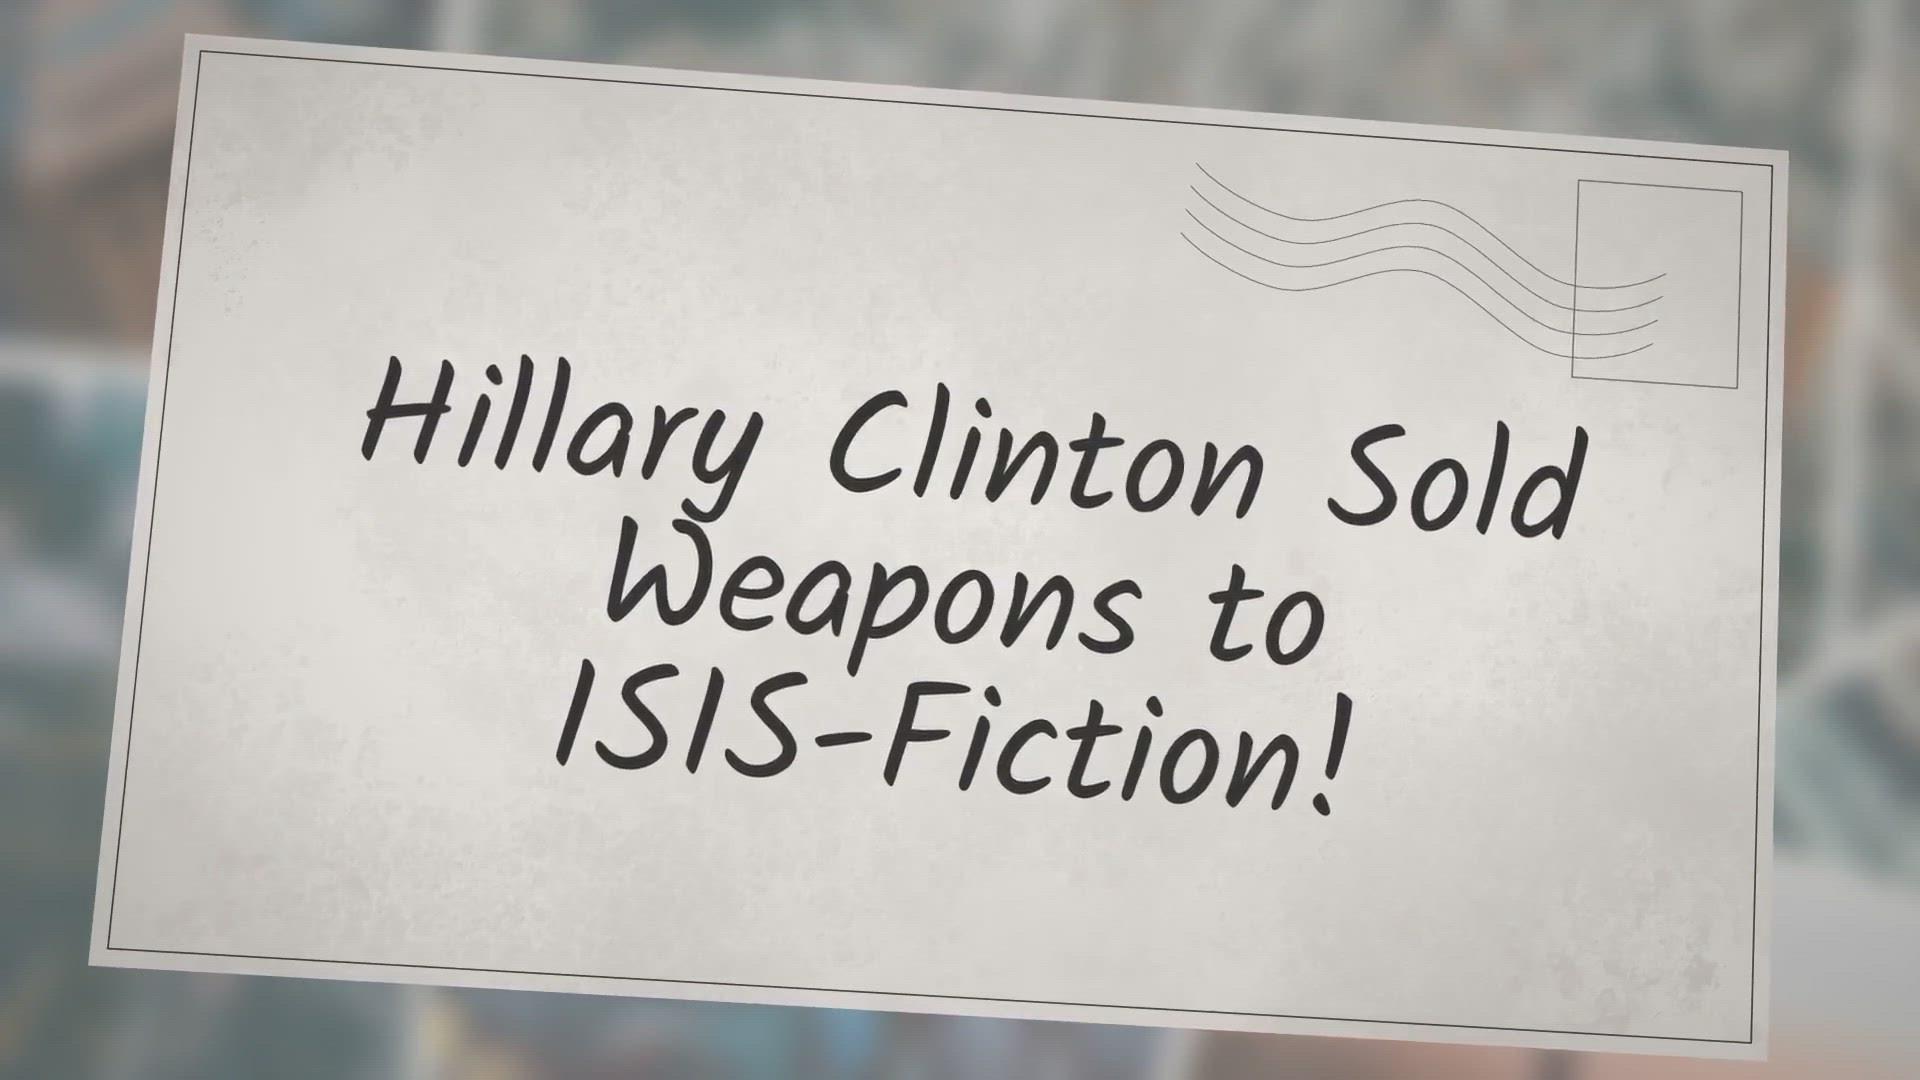 'Video thumbnail for Hillary Clinton Sold Weapons to ISIS-Fiction!'